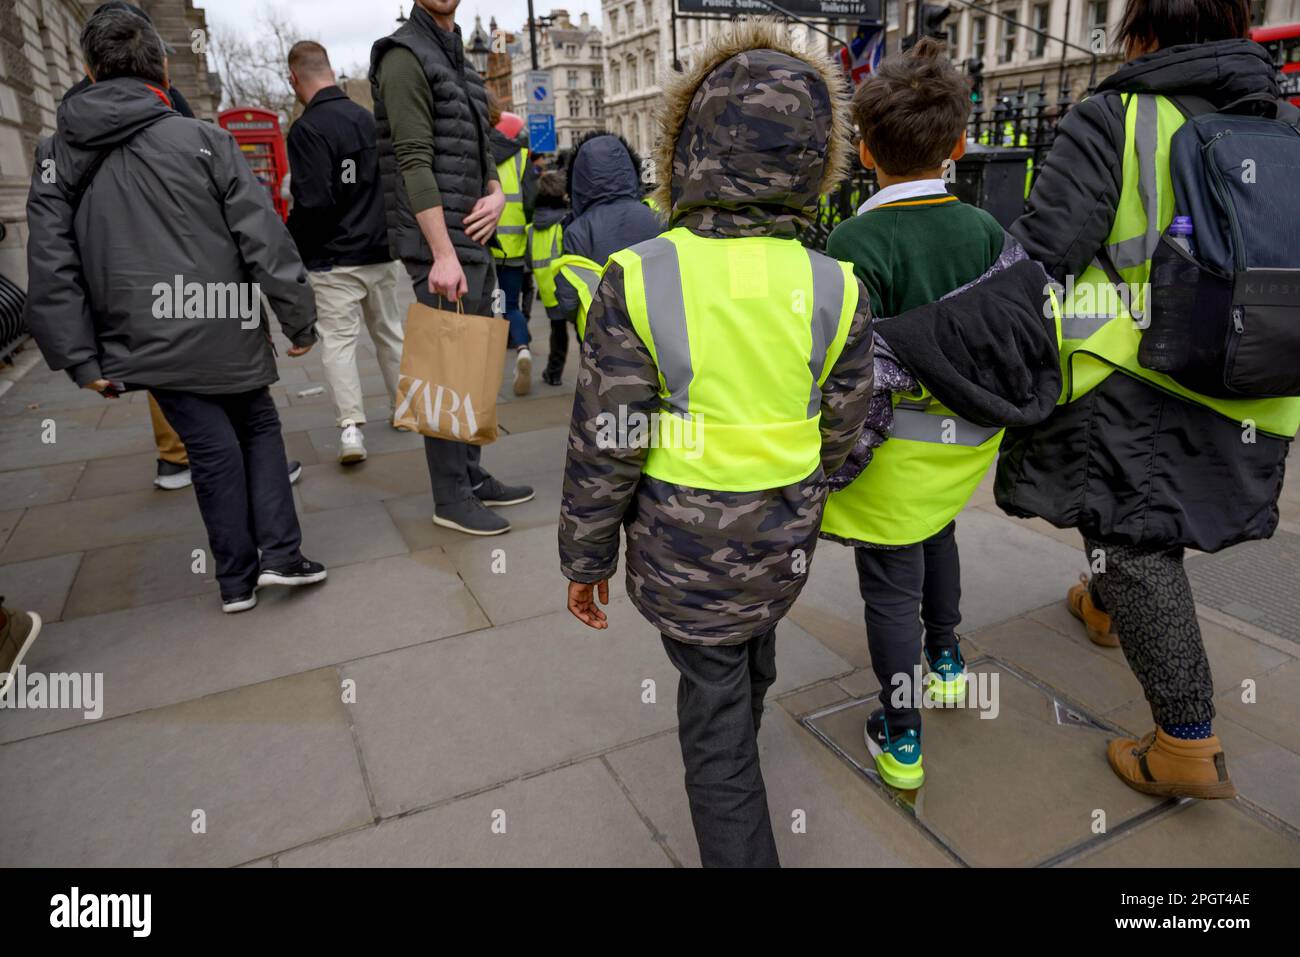 London, England, UK. Young schoolchildren on an outing in cntral London, wearing hi-vis jackets Stock Photo